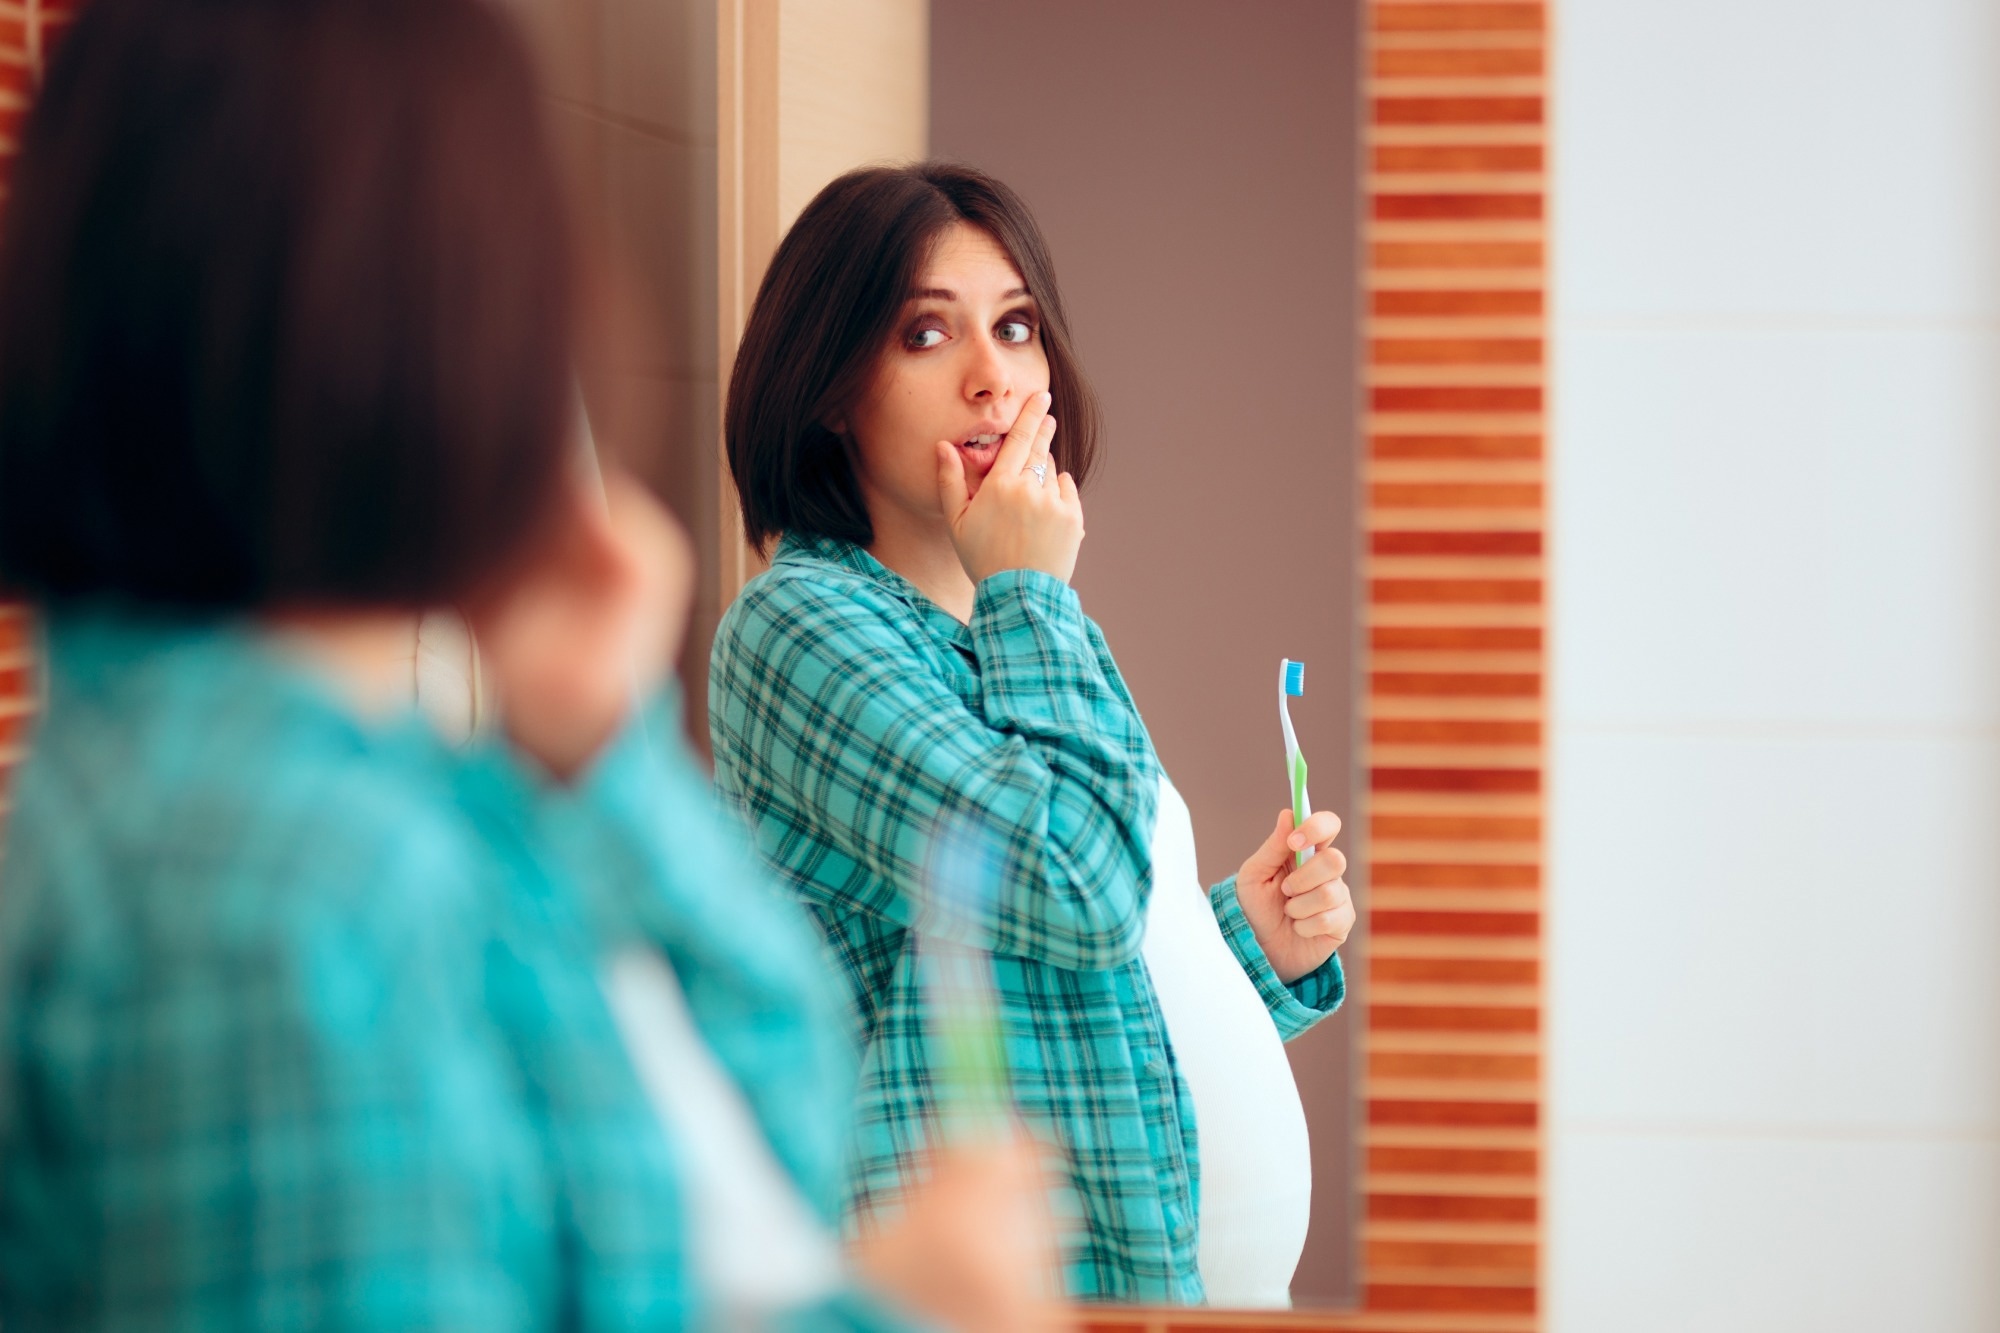 Study: How much do pregnant women know about the importance of oral health in pregnancy? Questionnaire-based survey. Image Credit: Nicoleta Ionescu / Shutterstock